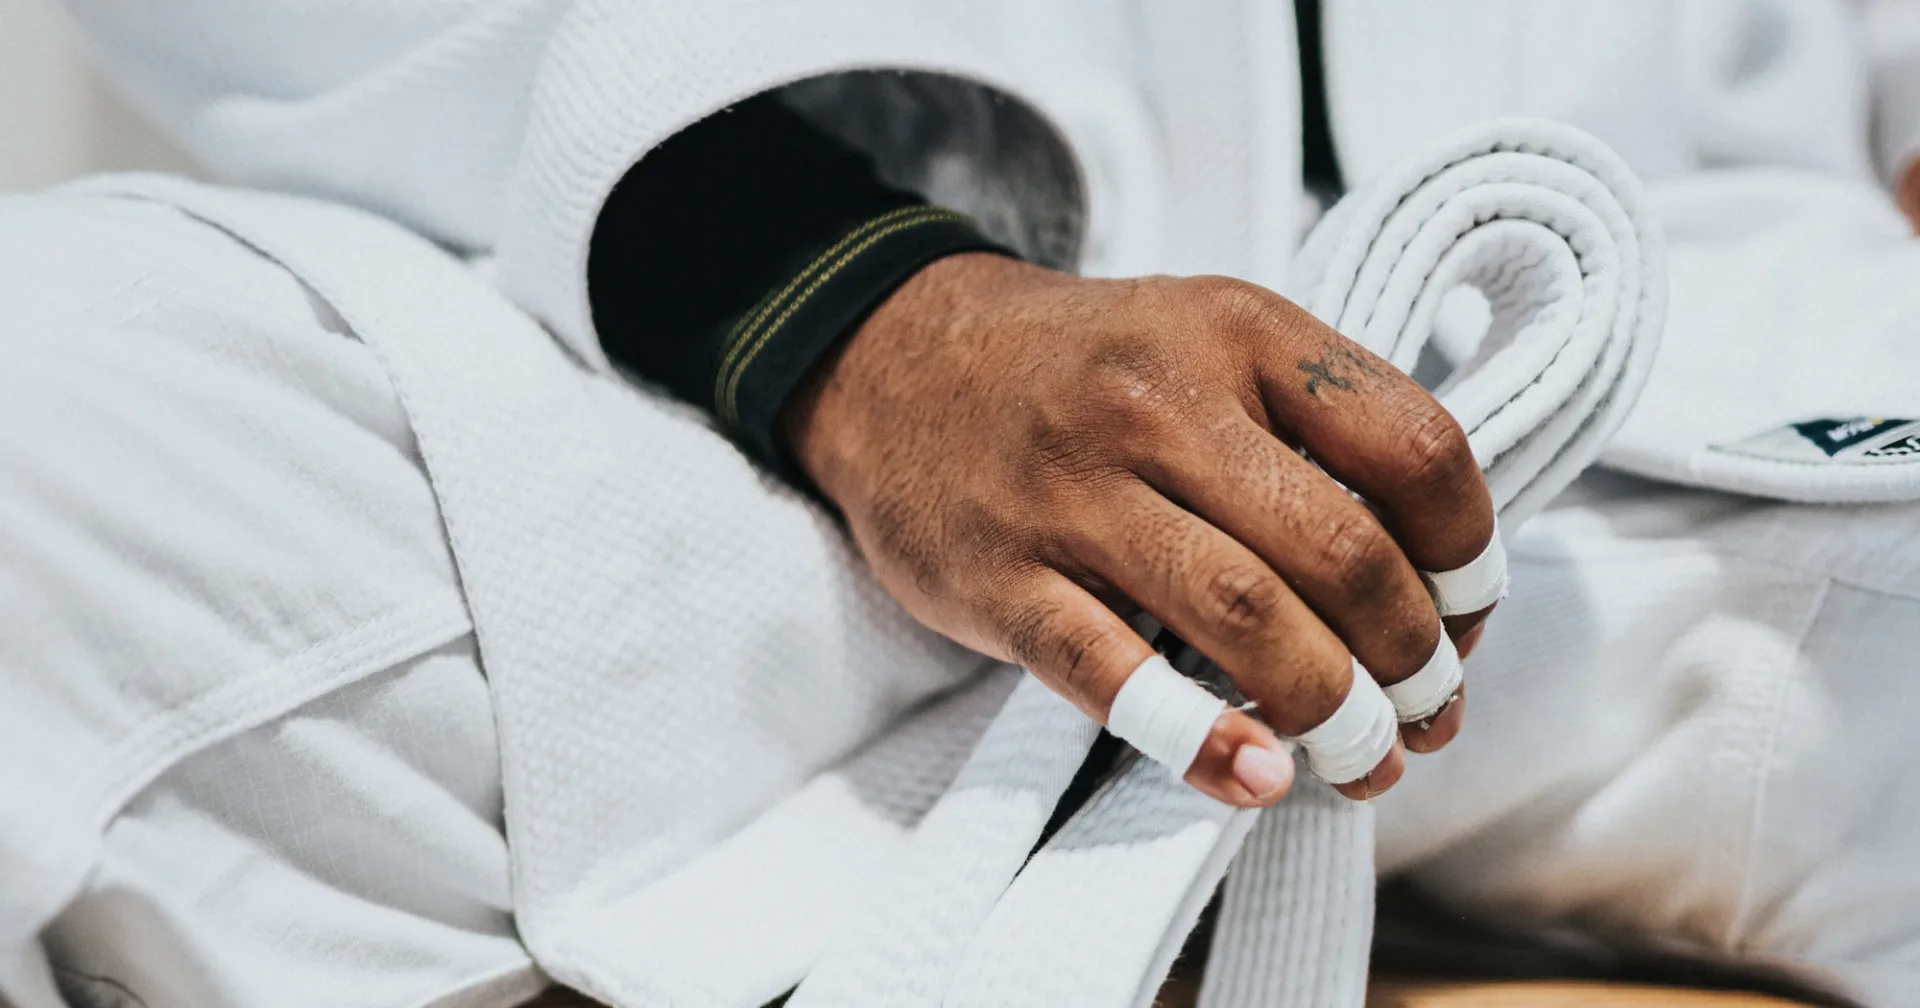 image of someone in martial arts uniform holding a white belt